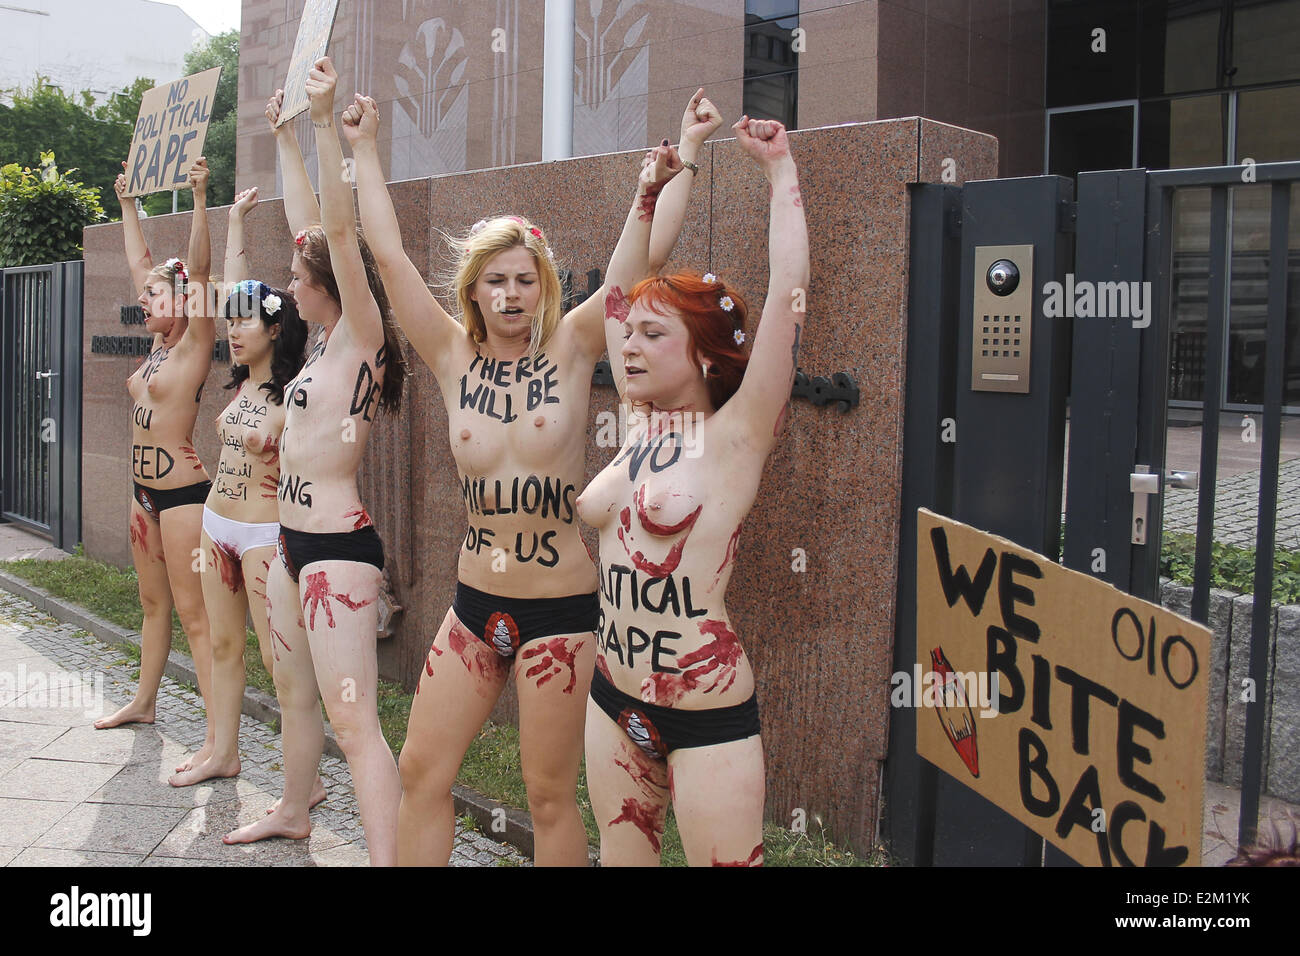 Members of Femen feminist protest group demonstrating at the Egyptian Embassy in Berlin  Where: Berlin, Germany When: 19 Jul 2013 Stock Photo